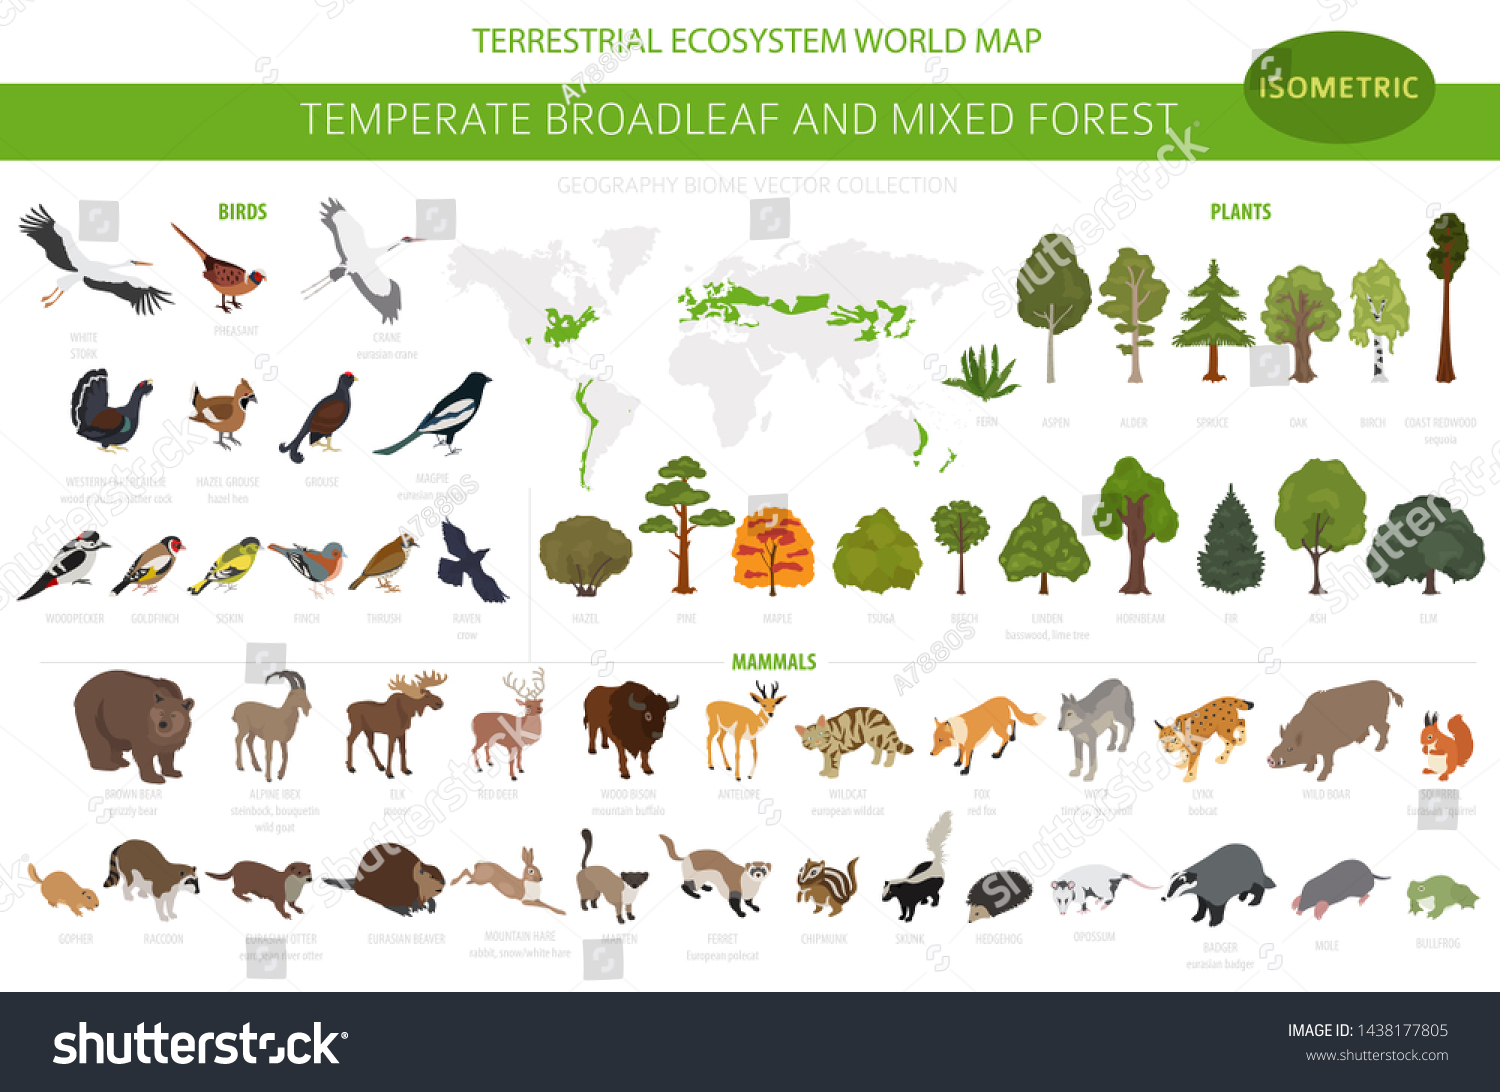 SVG of Temperate broadleaf forest and mixed forest biome. Terrestrial ecosystem world map. Animals, birds and plants set. 3d isometric graphic design. Vector illustration svg